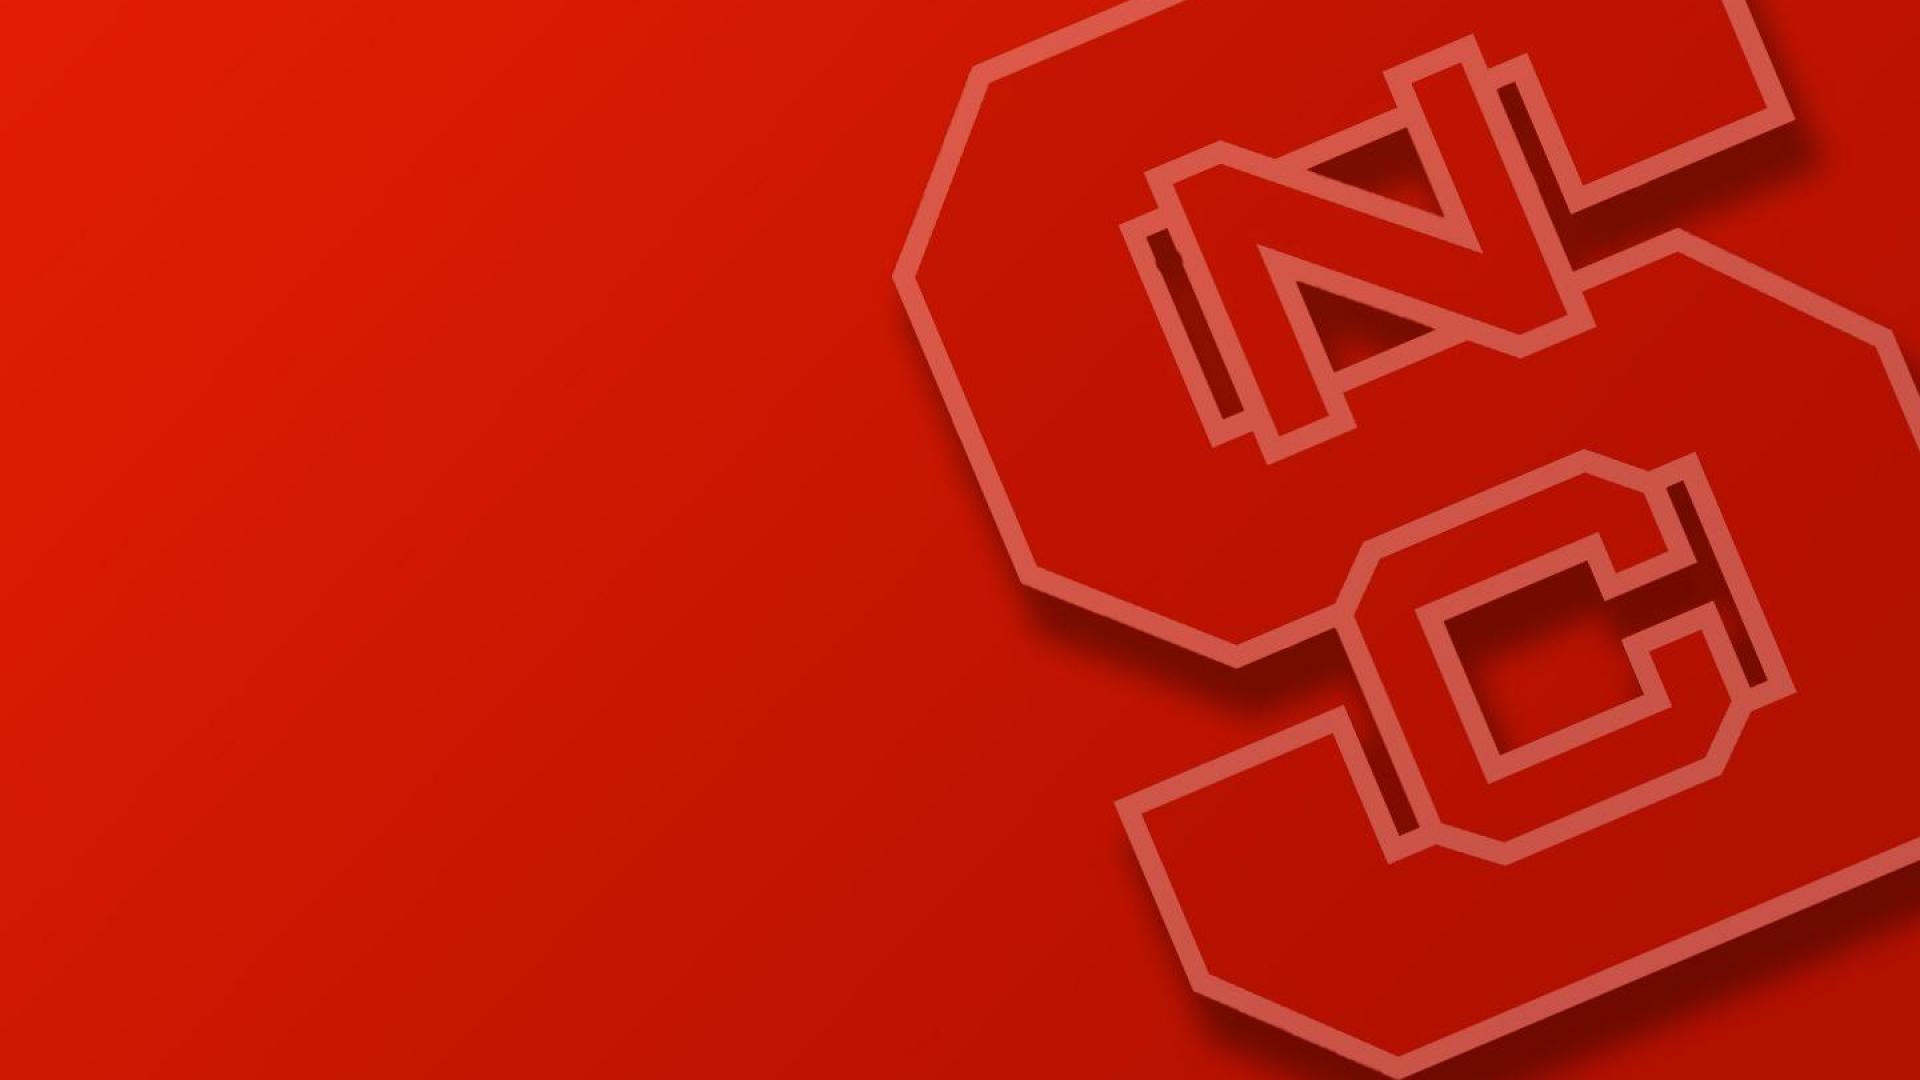 Nc state - (#54834) - High Quality and Resolution Wallpapers on ...